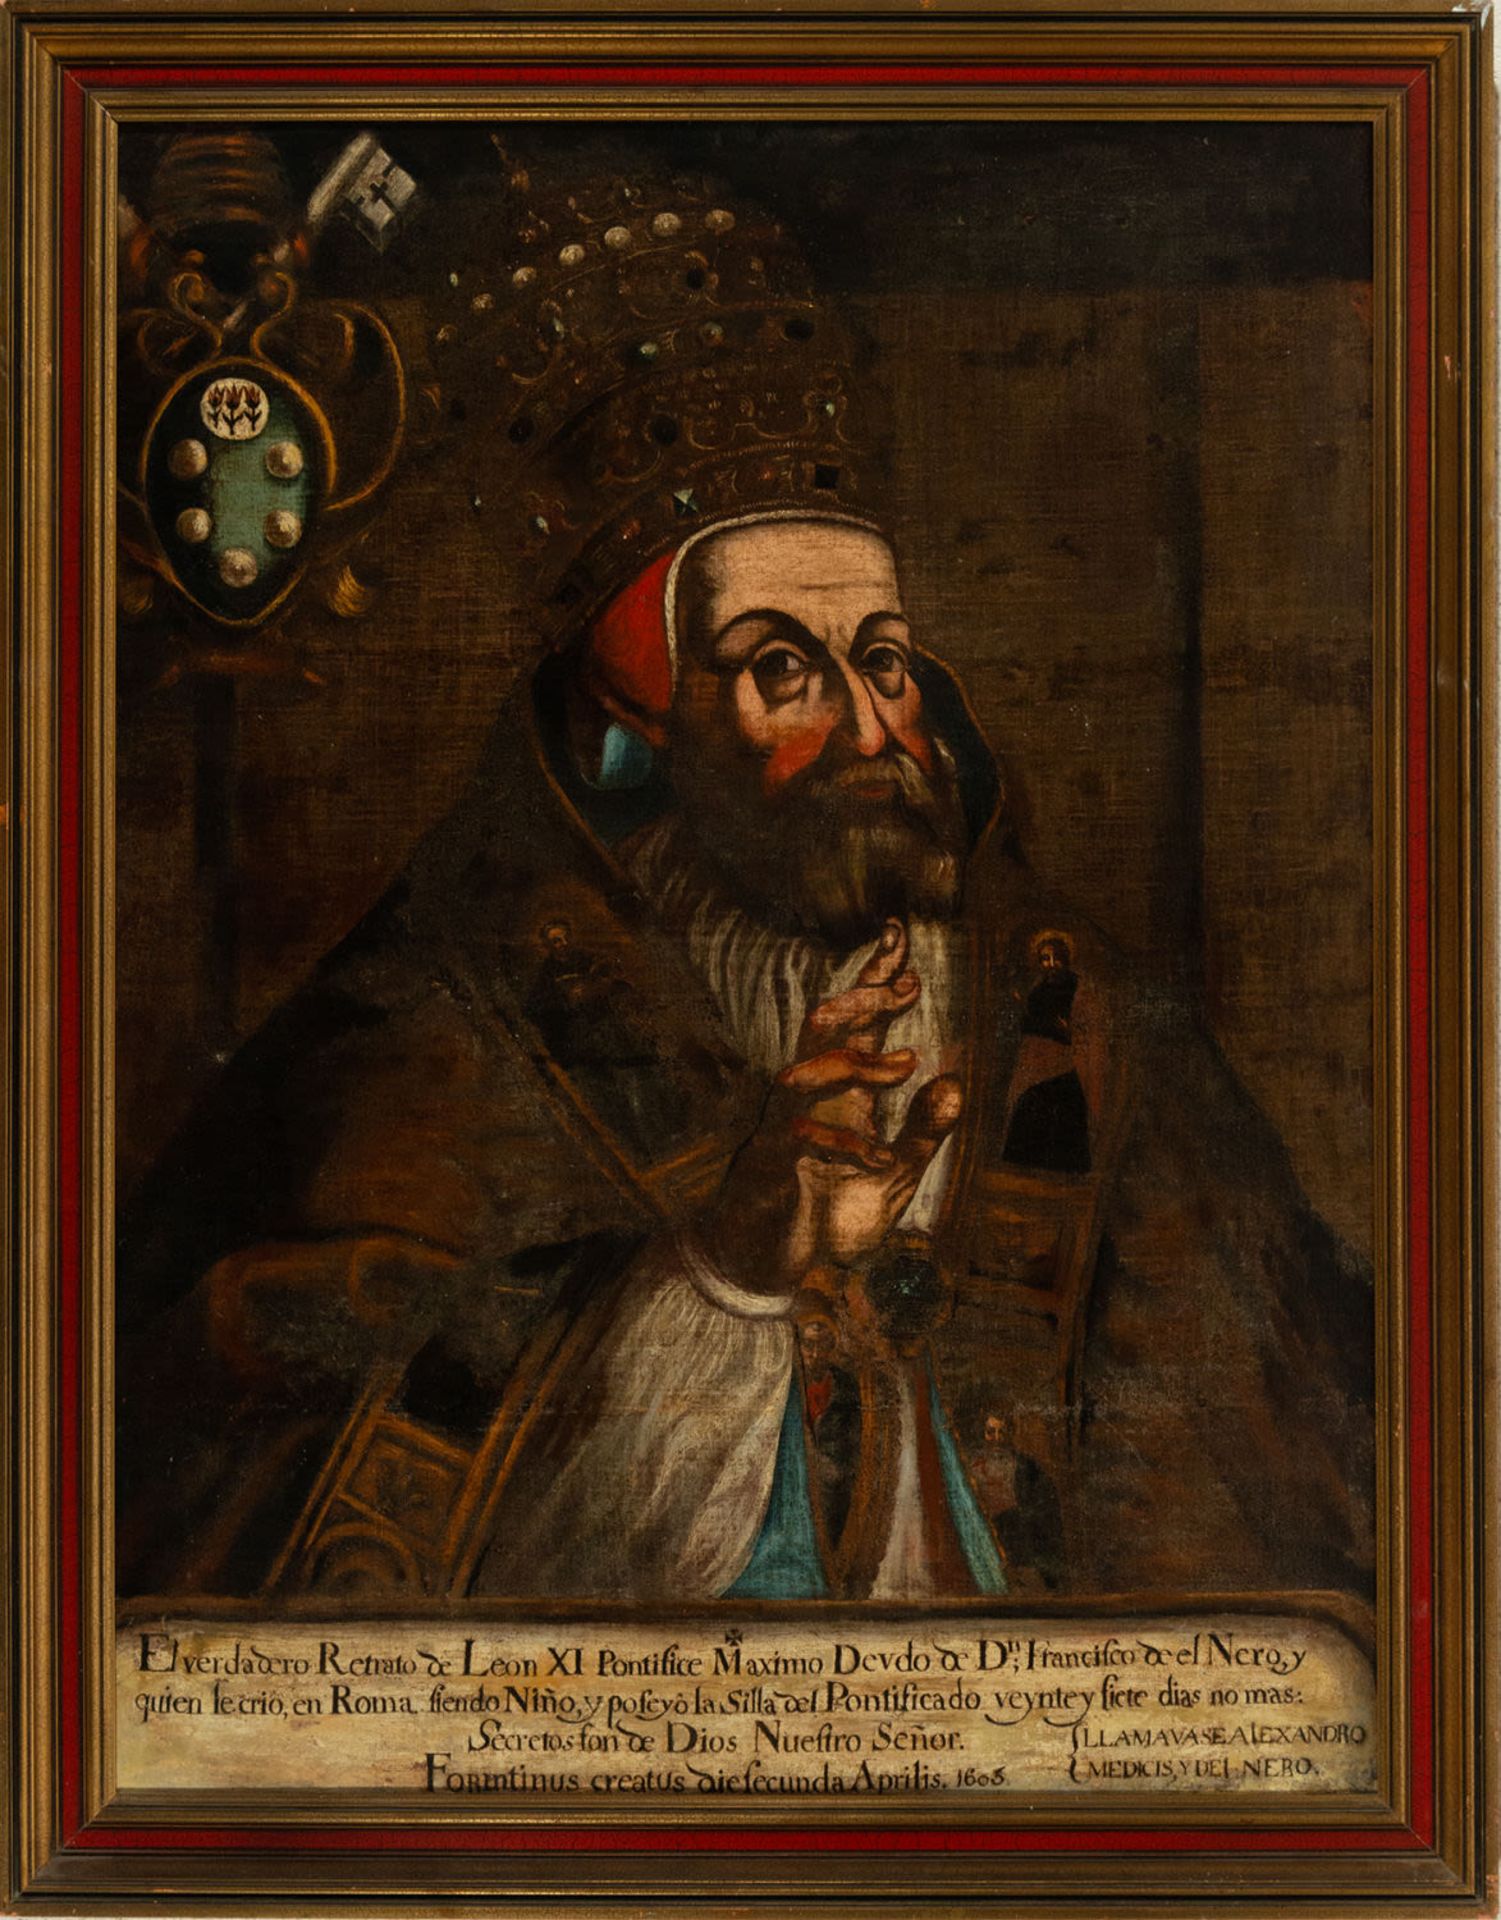 Exceptional Portrait of León XI, Spanish or colonial Novohispana school from the end of the 16th cen